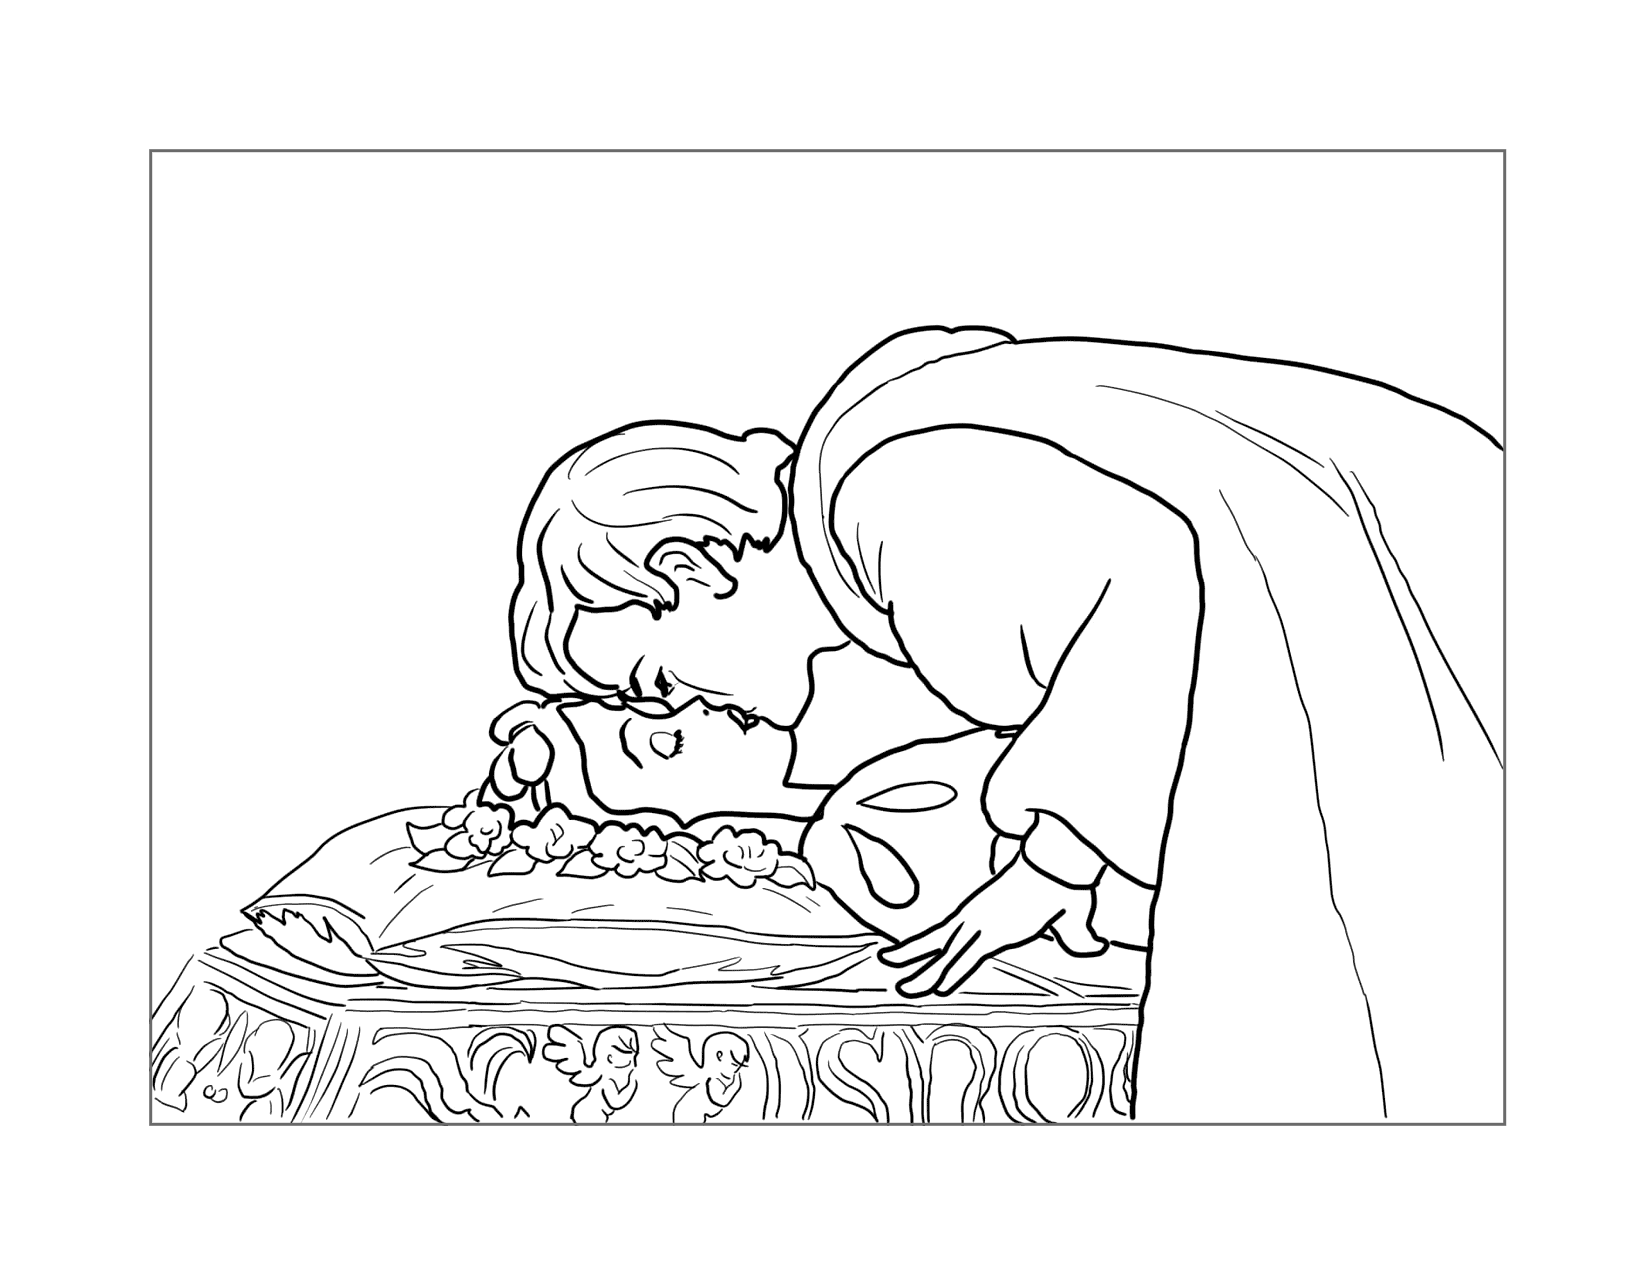 The Prince Wakes Snow White Coloring Page